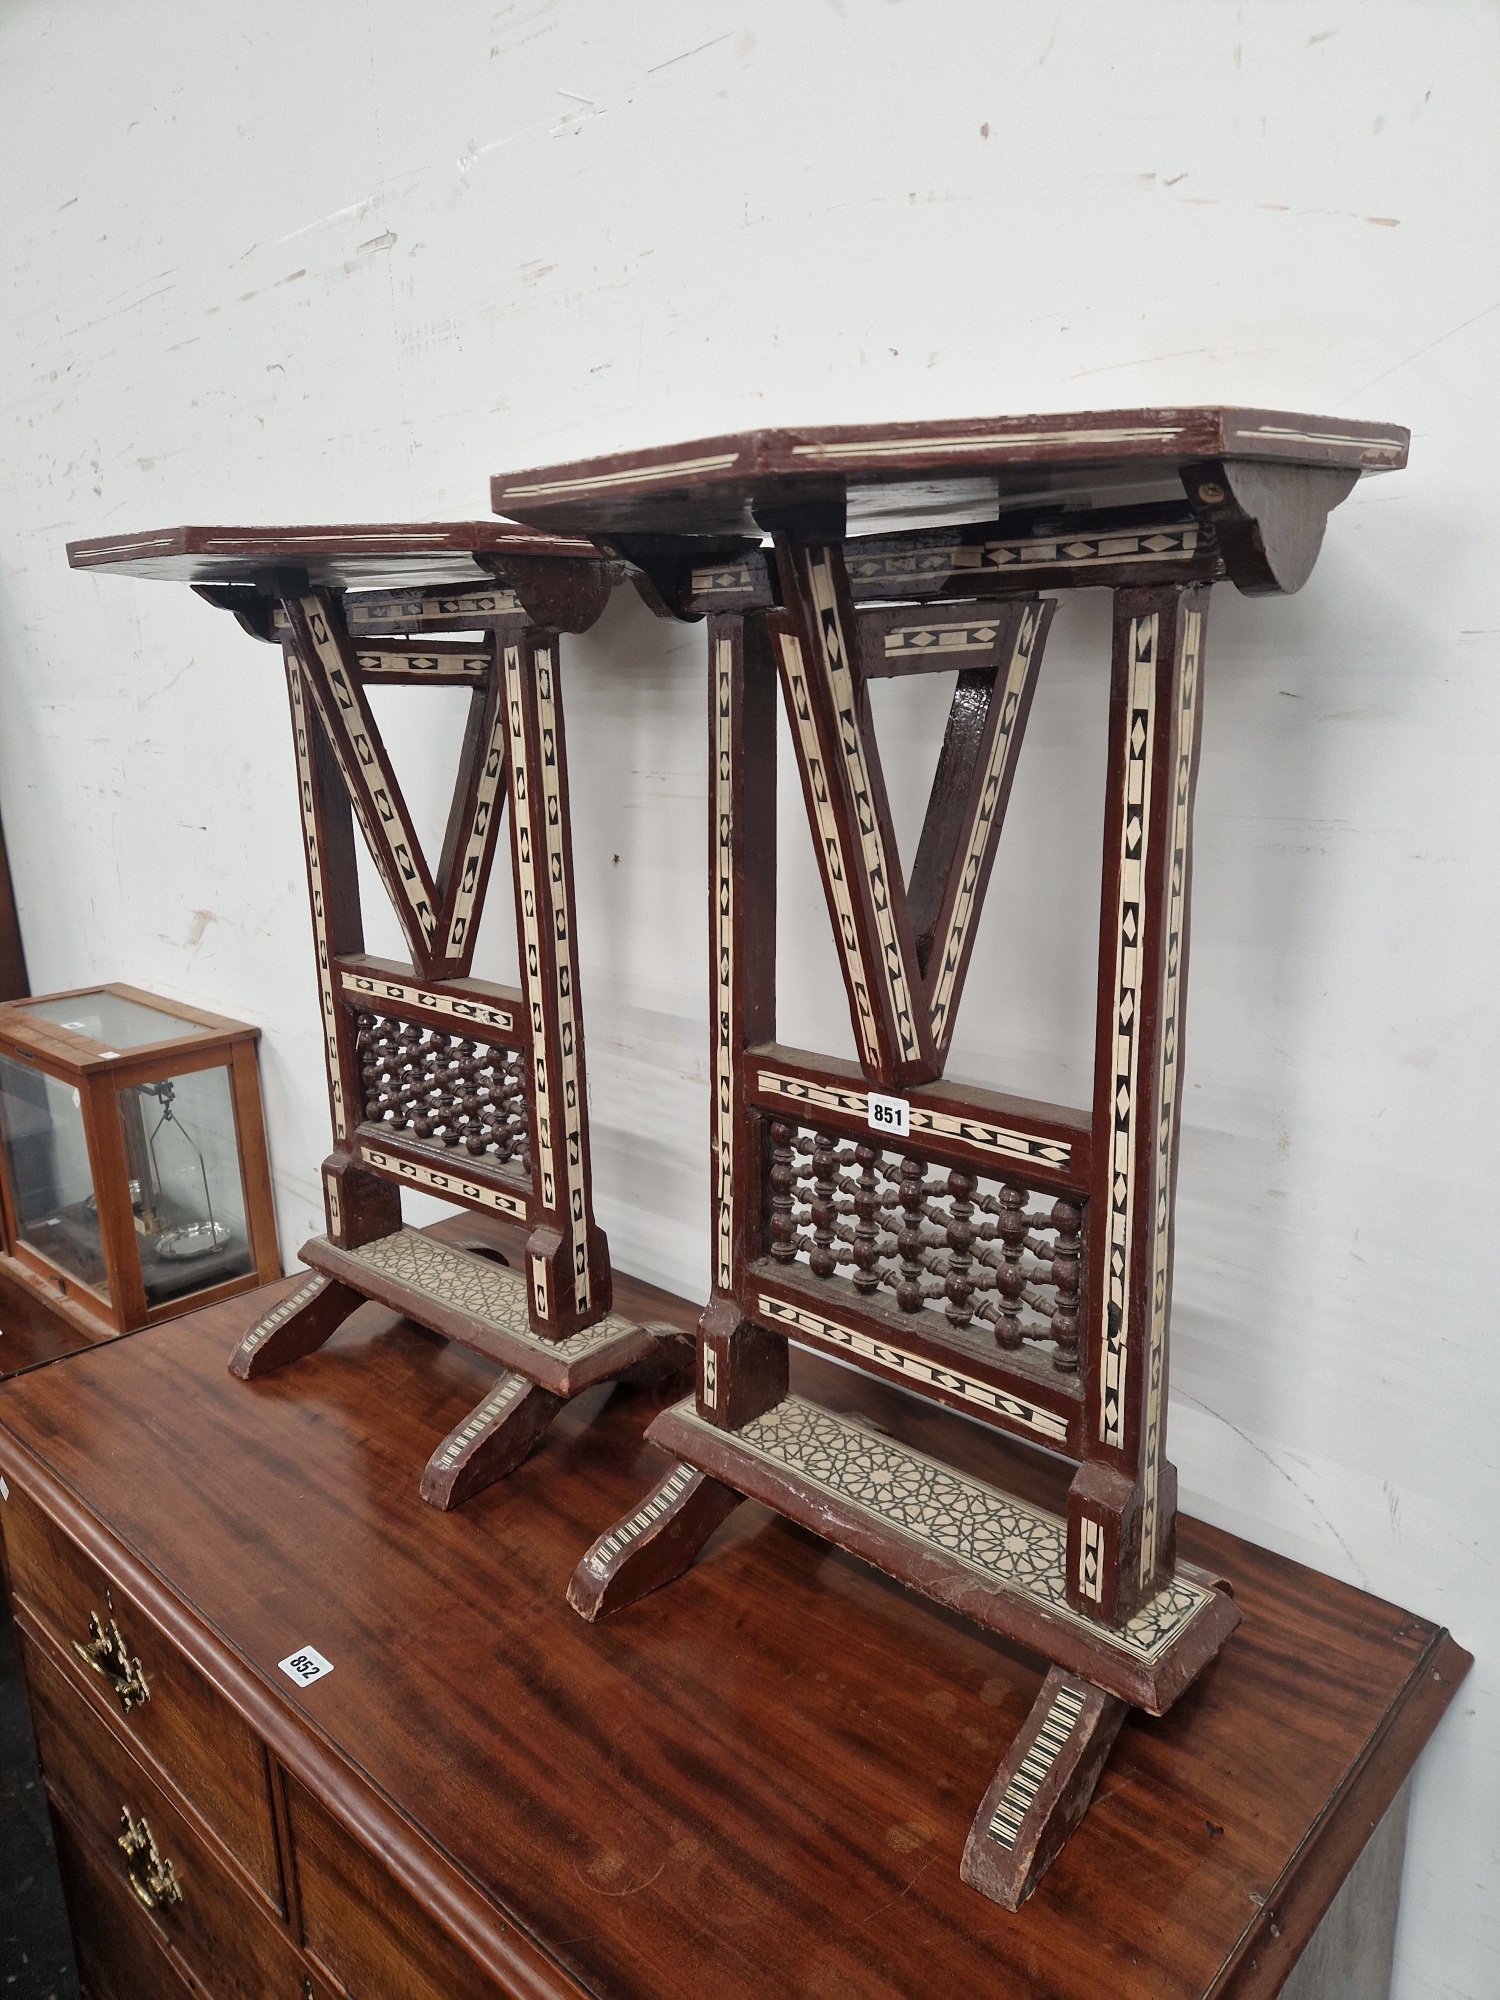 A PAIR OF ISLAMIC FOLDING OCTAGONAL TABLES GEOMETRICALLY INLAID IN MOTHER OF PEARL AND EBONY